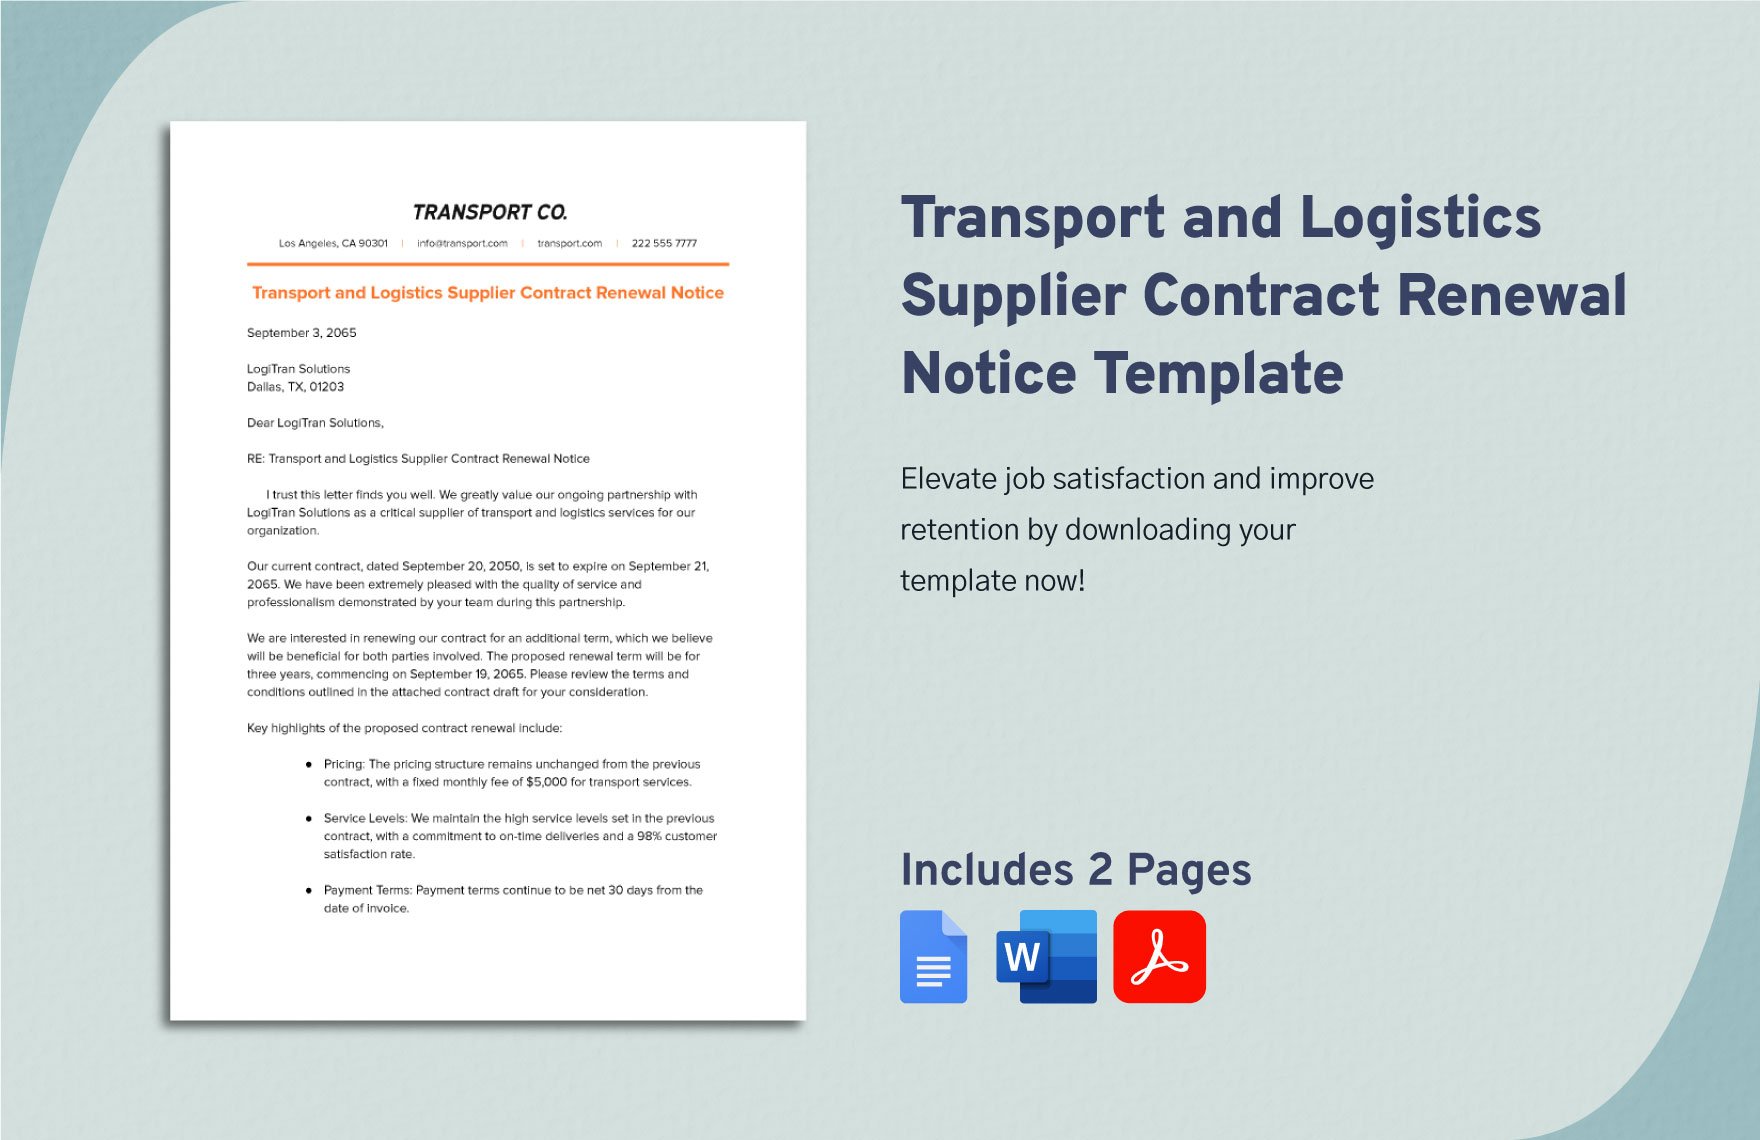 Transport and Logistics Supplier Contract Renewal Notice Template